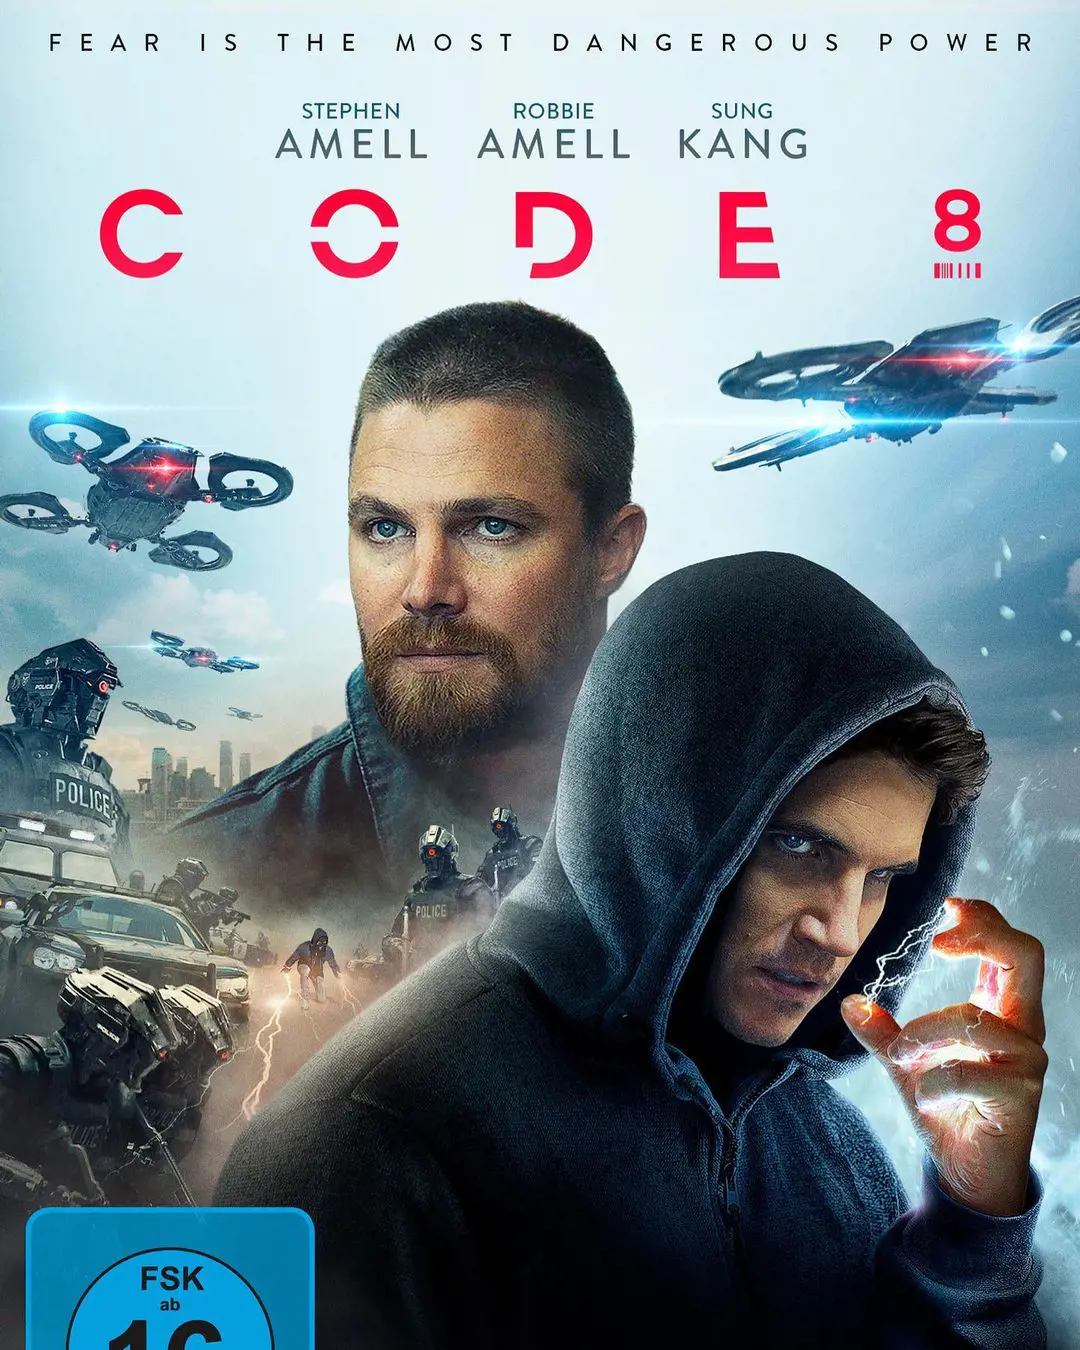 Poster of the 2019 Banker movie Code 8